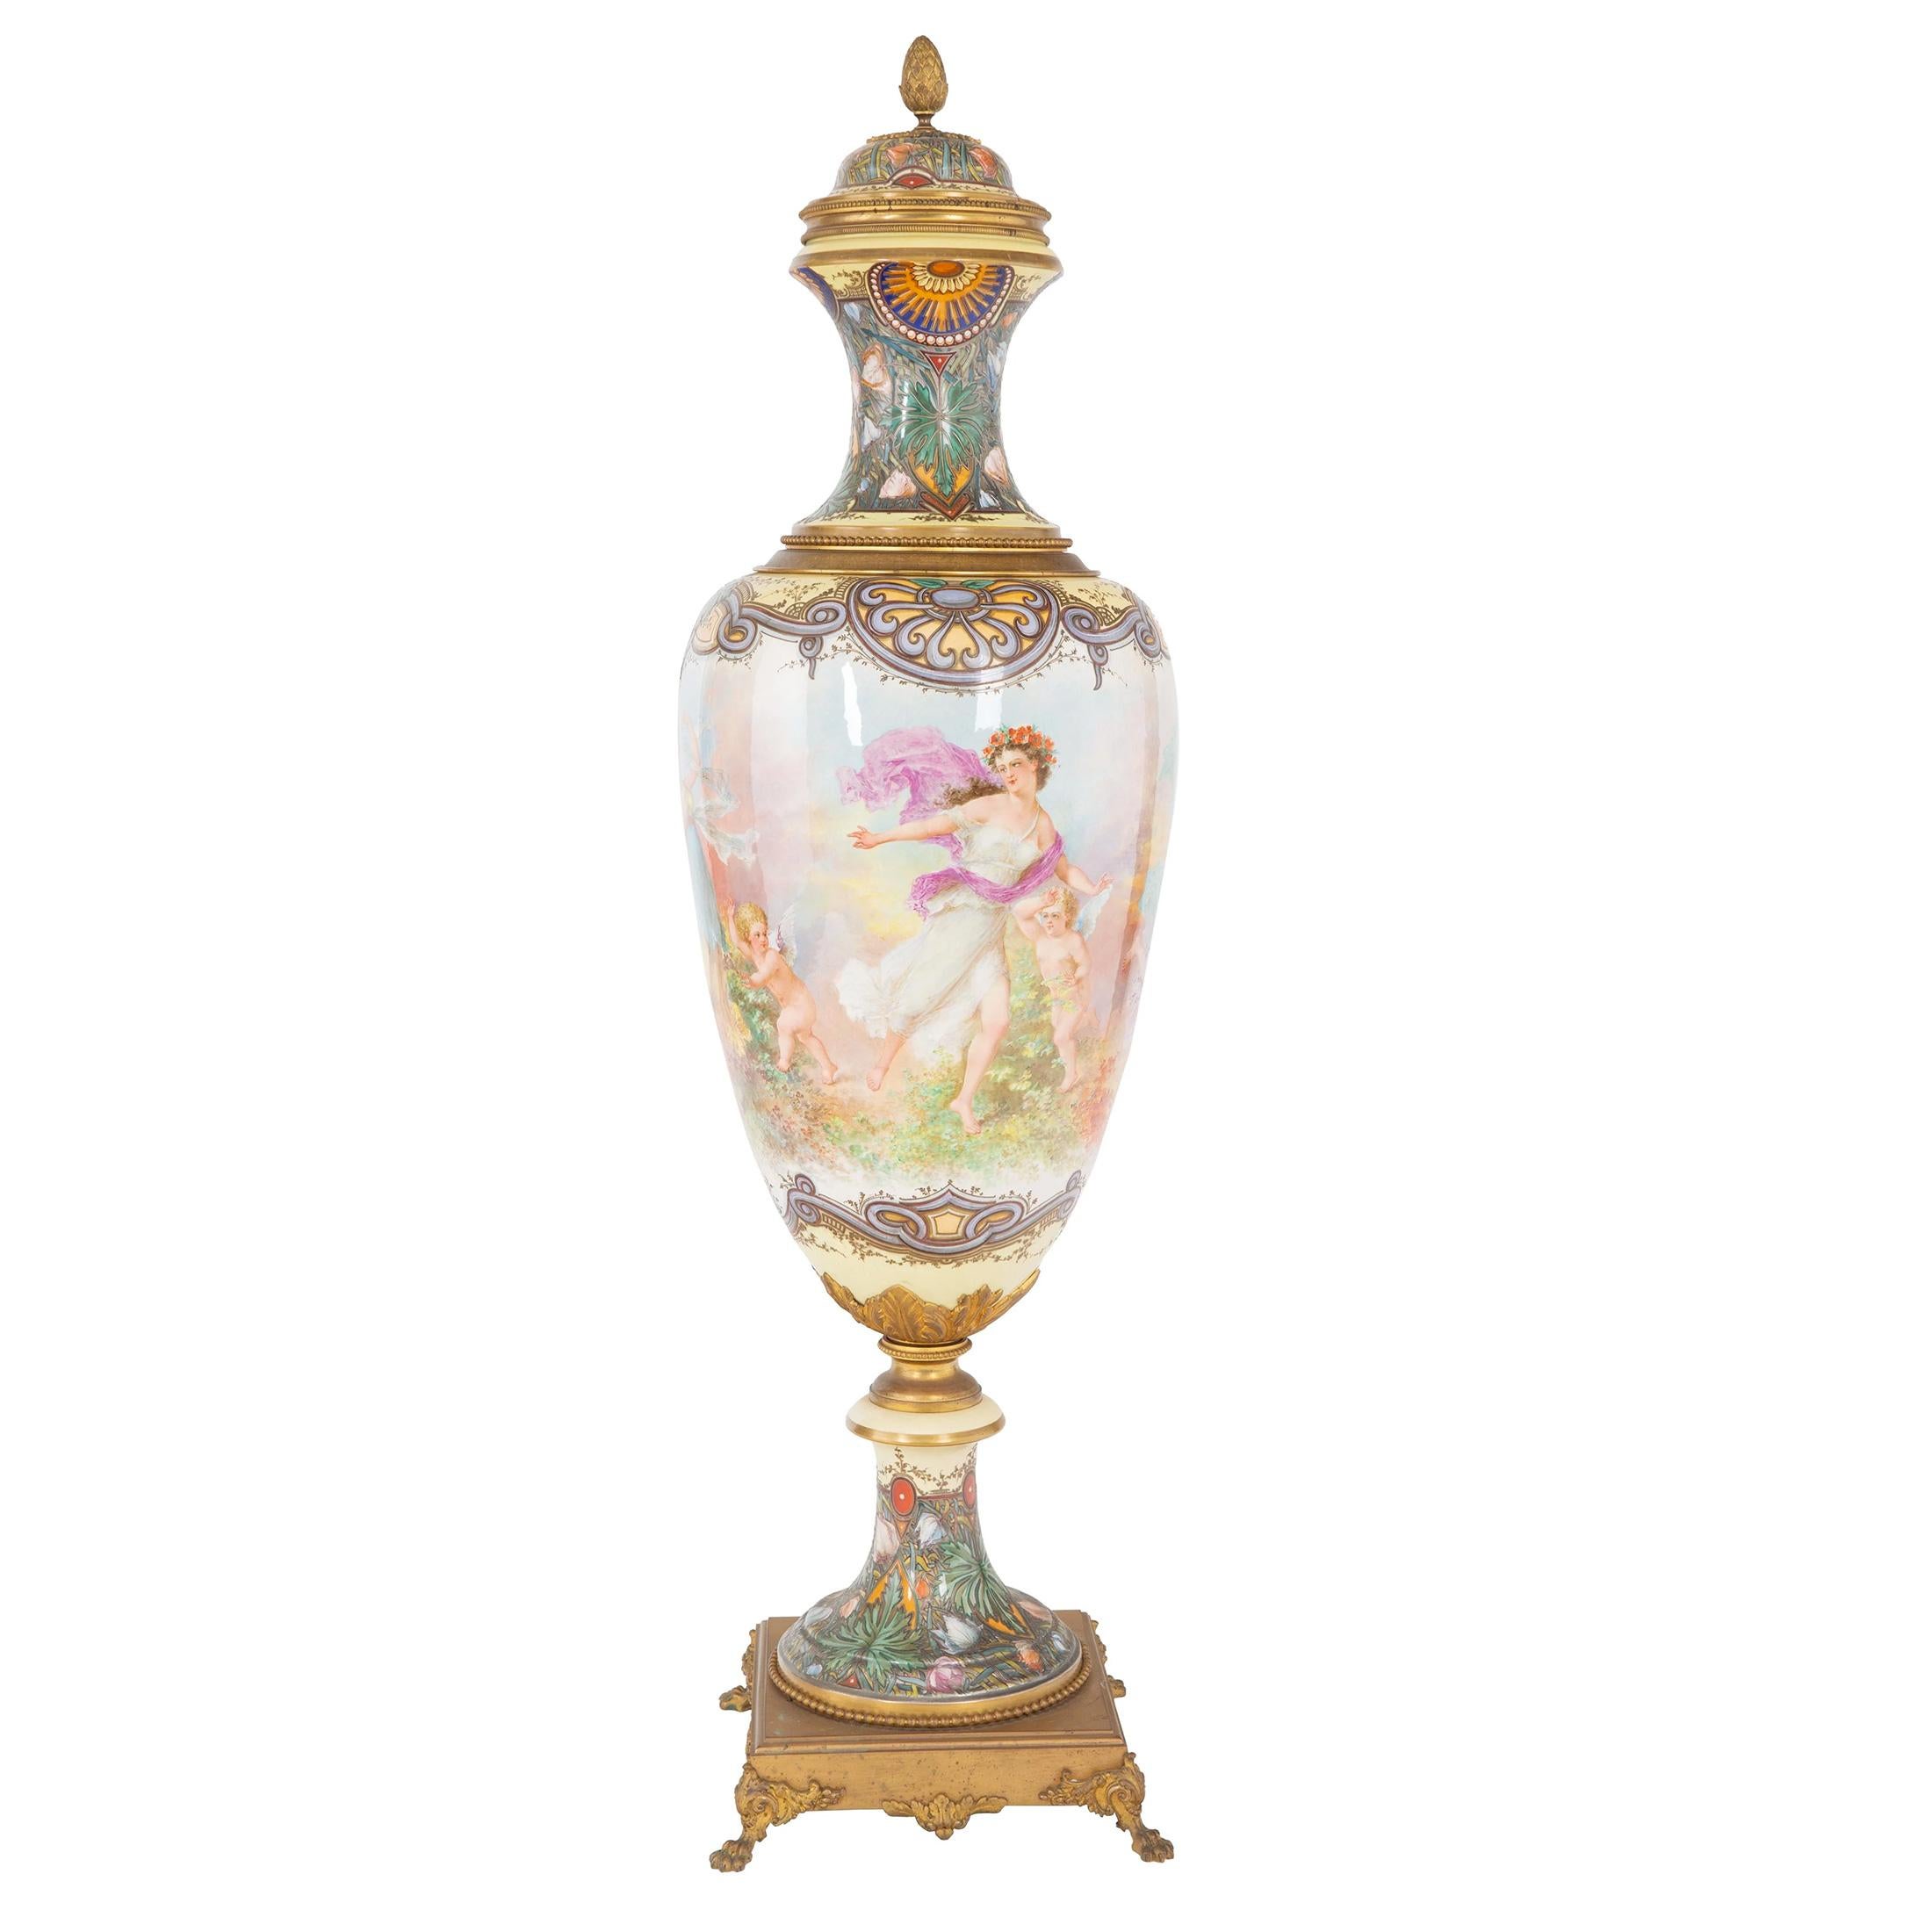  Pair of Monumental Sèvres and Gilt Bronze-Mounted Vase by Fuchs For Sale 8